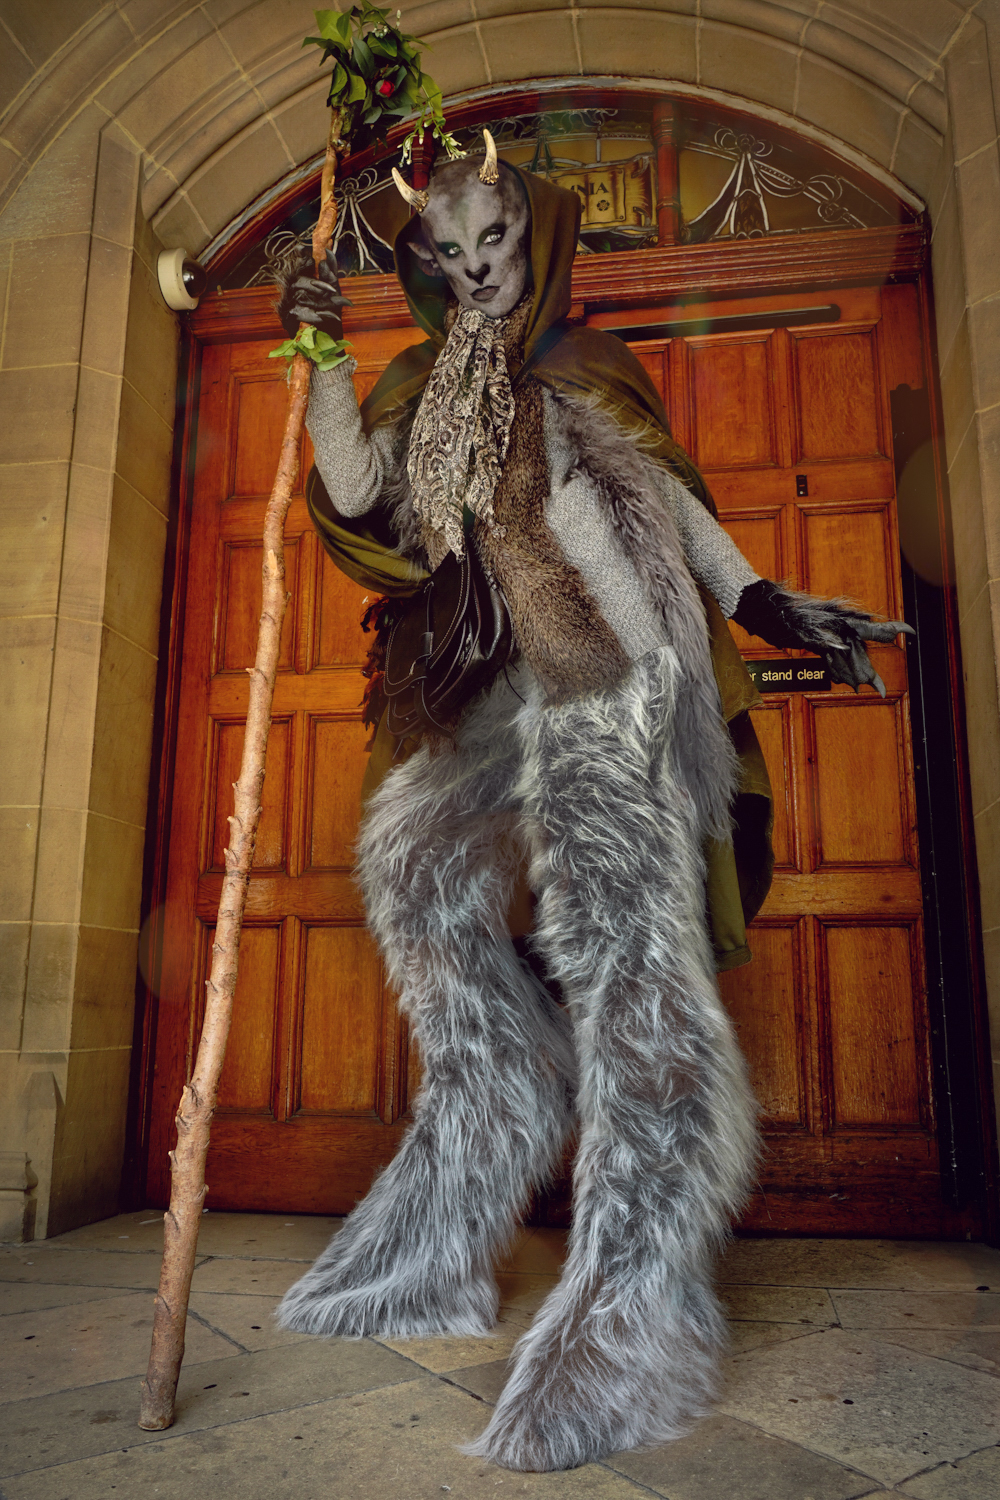 Beautiful roving faun creature entertainment for events, TV, film, and photo-shoots.